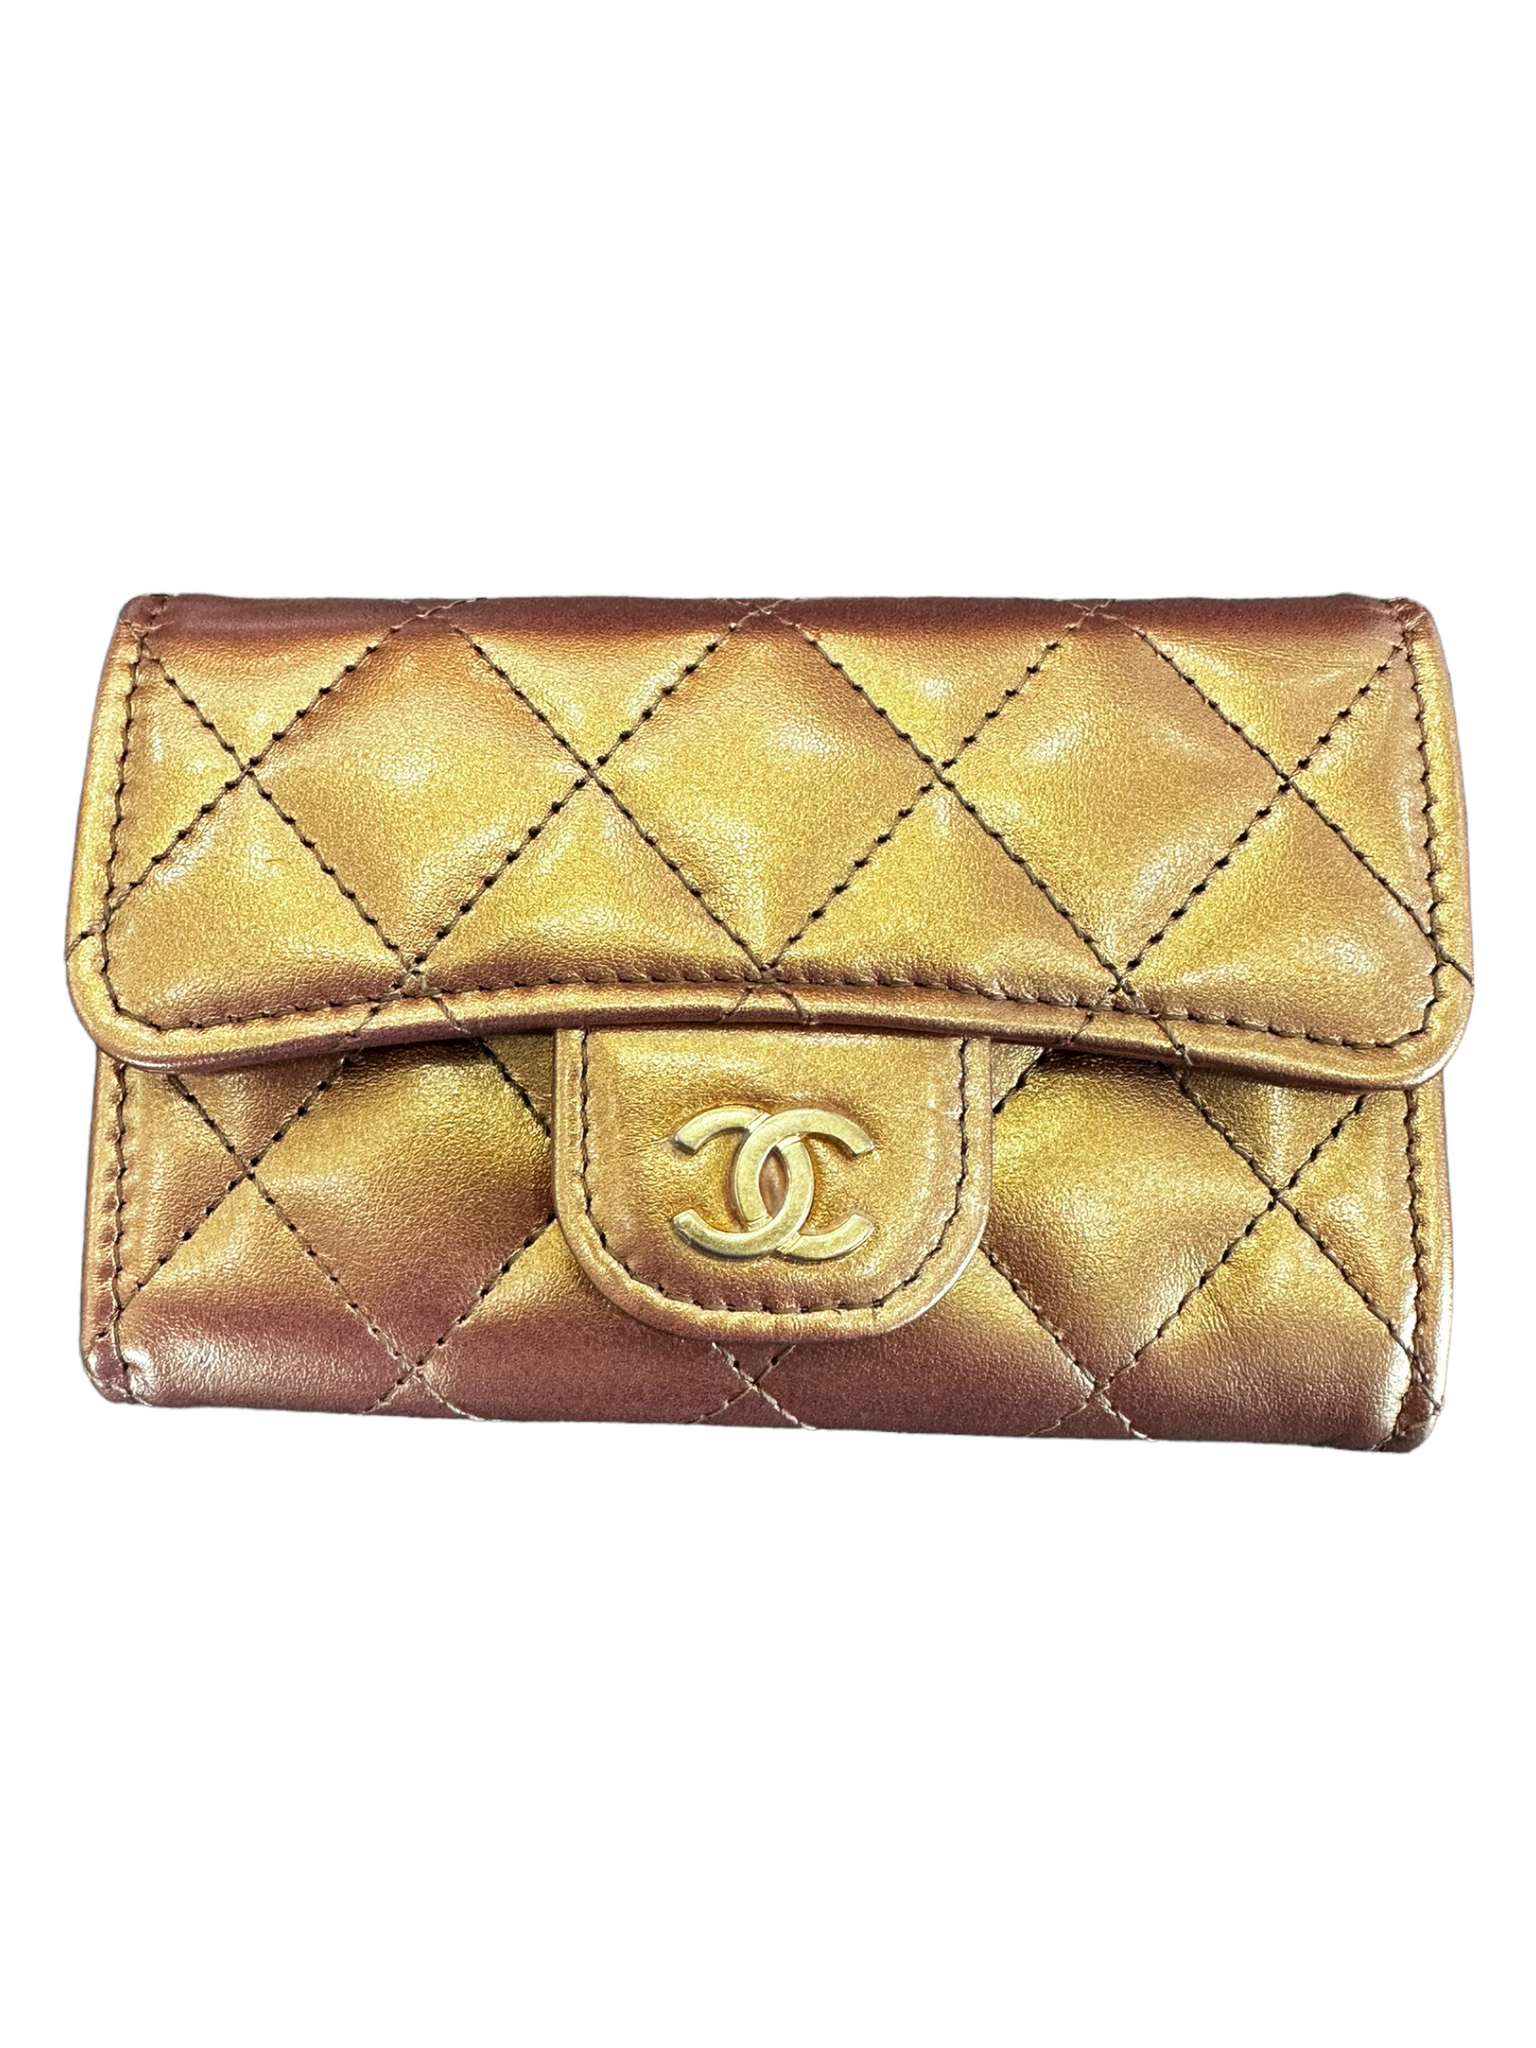 Chanel Classic Single Flap Bag Quilted Iridescent Calfskin Mini at